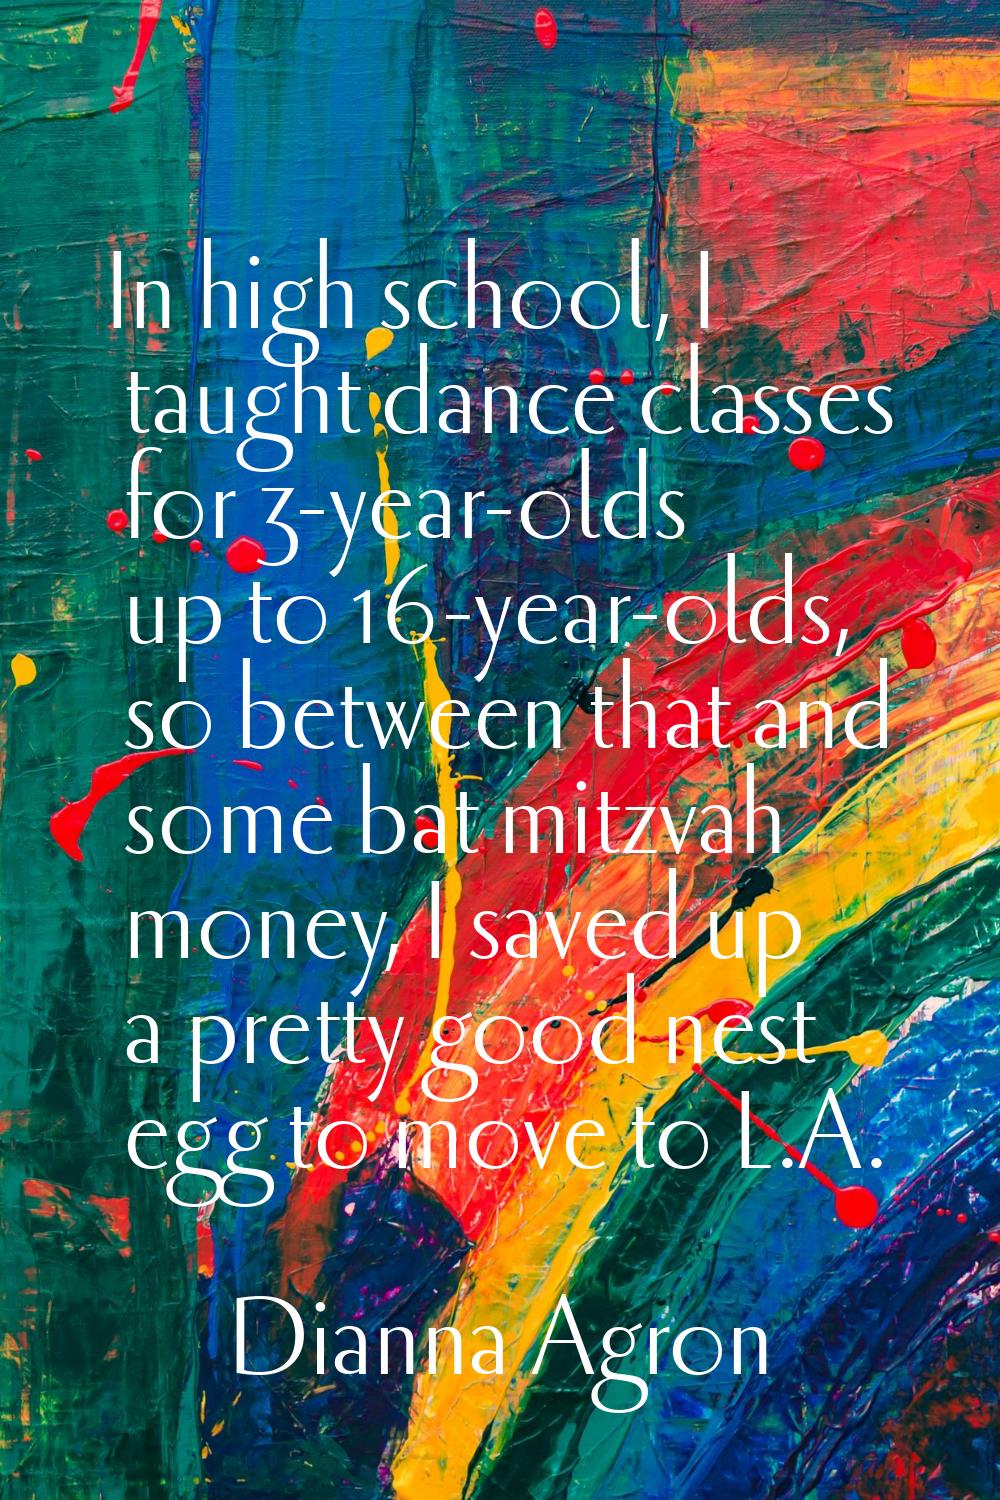 In high school, I taught dance classes for 3-year-olds up to 16-year-olds, so between that and some